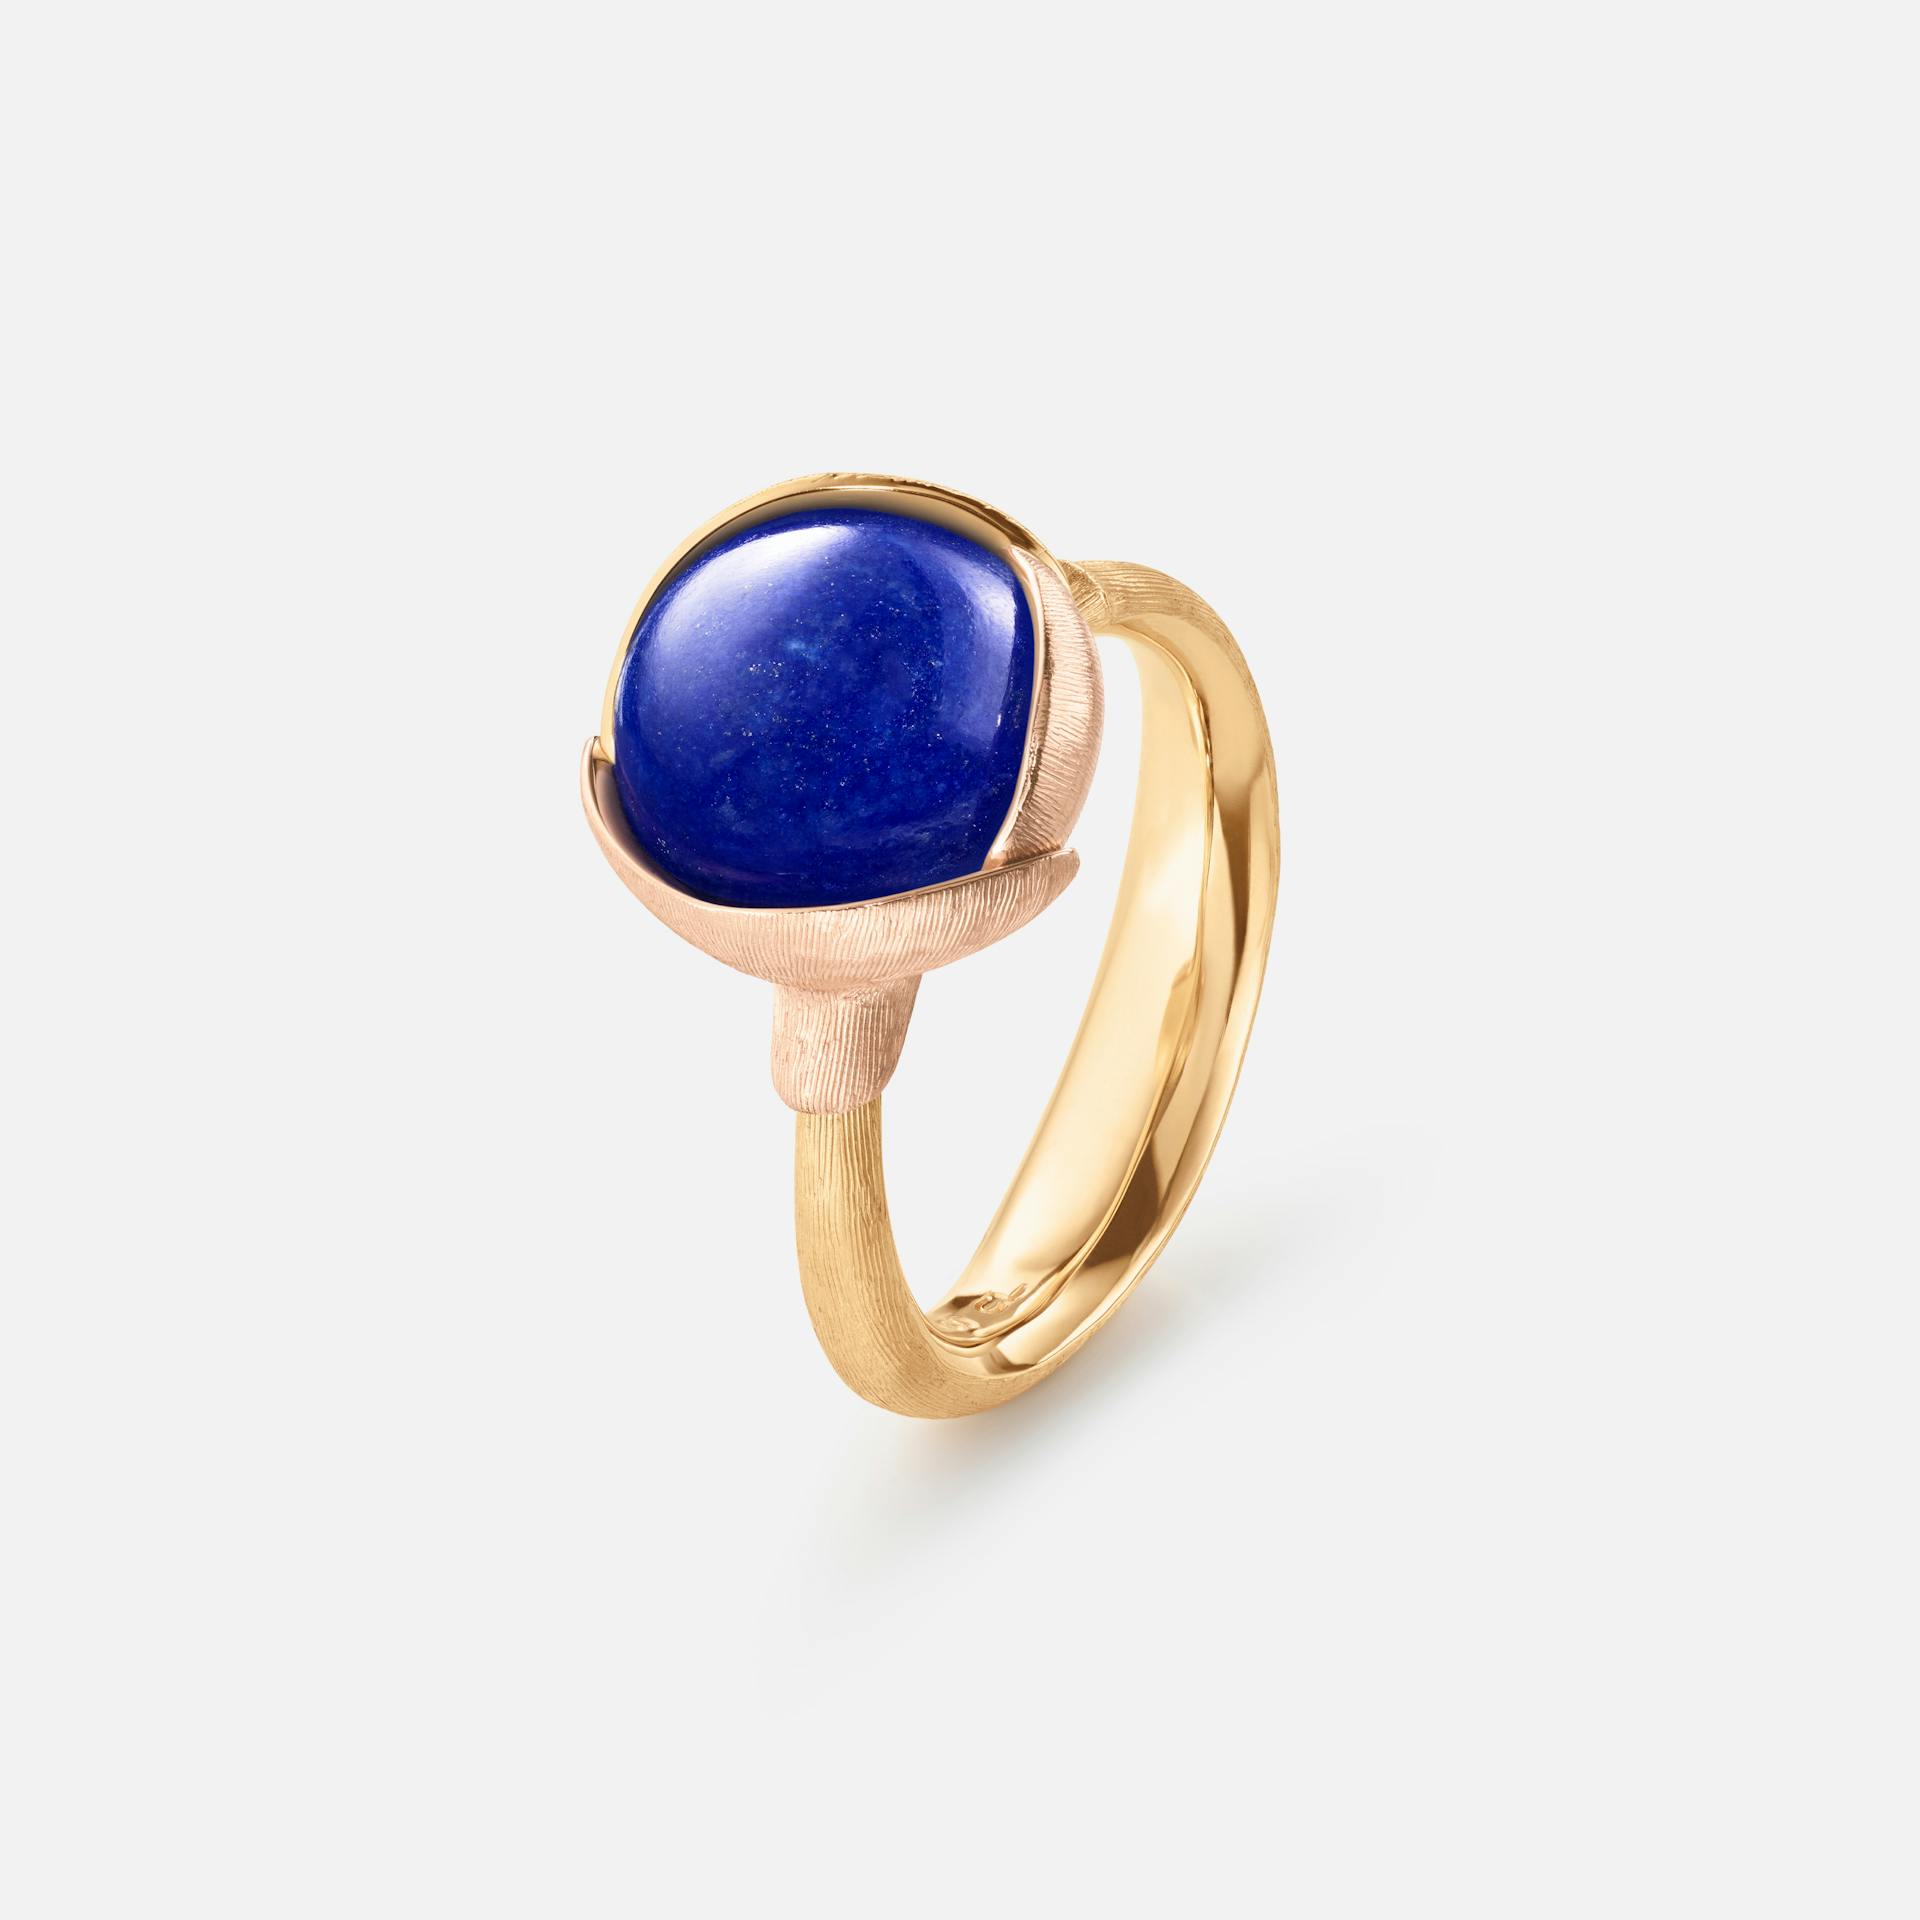 Lotus Ring size 2 in Yellow and Rose Gold  with Lapis Lazuli  |  Ole Lynggaard Copenhagen